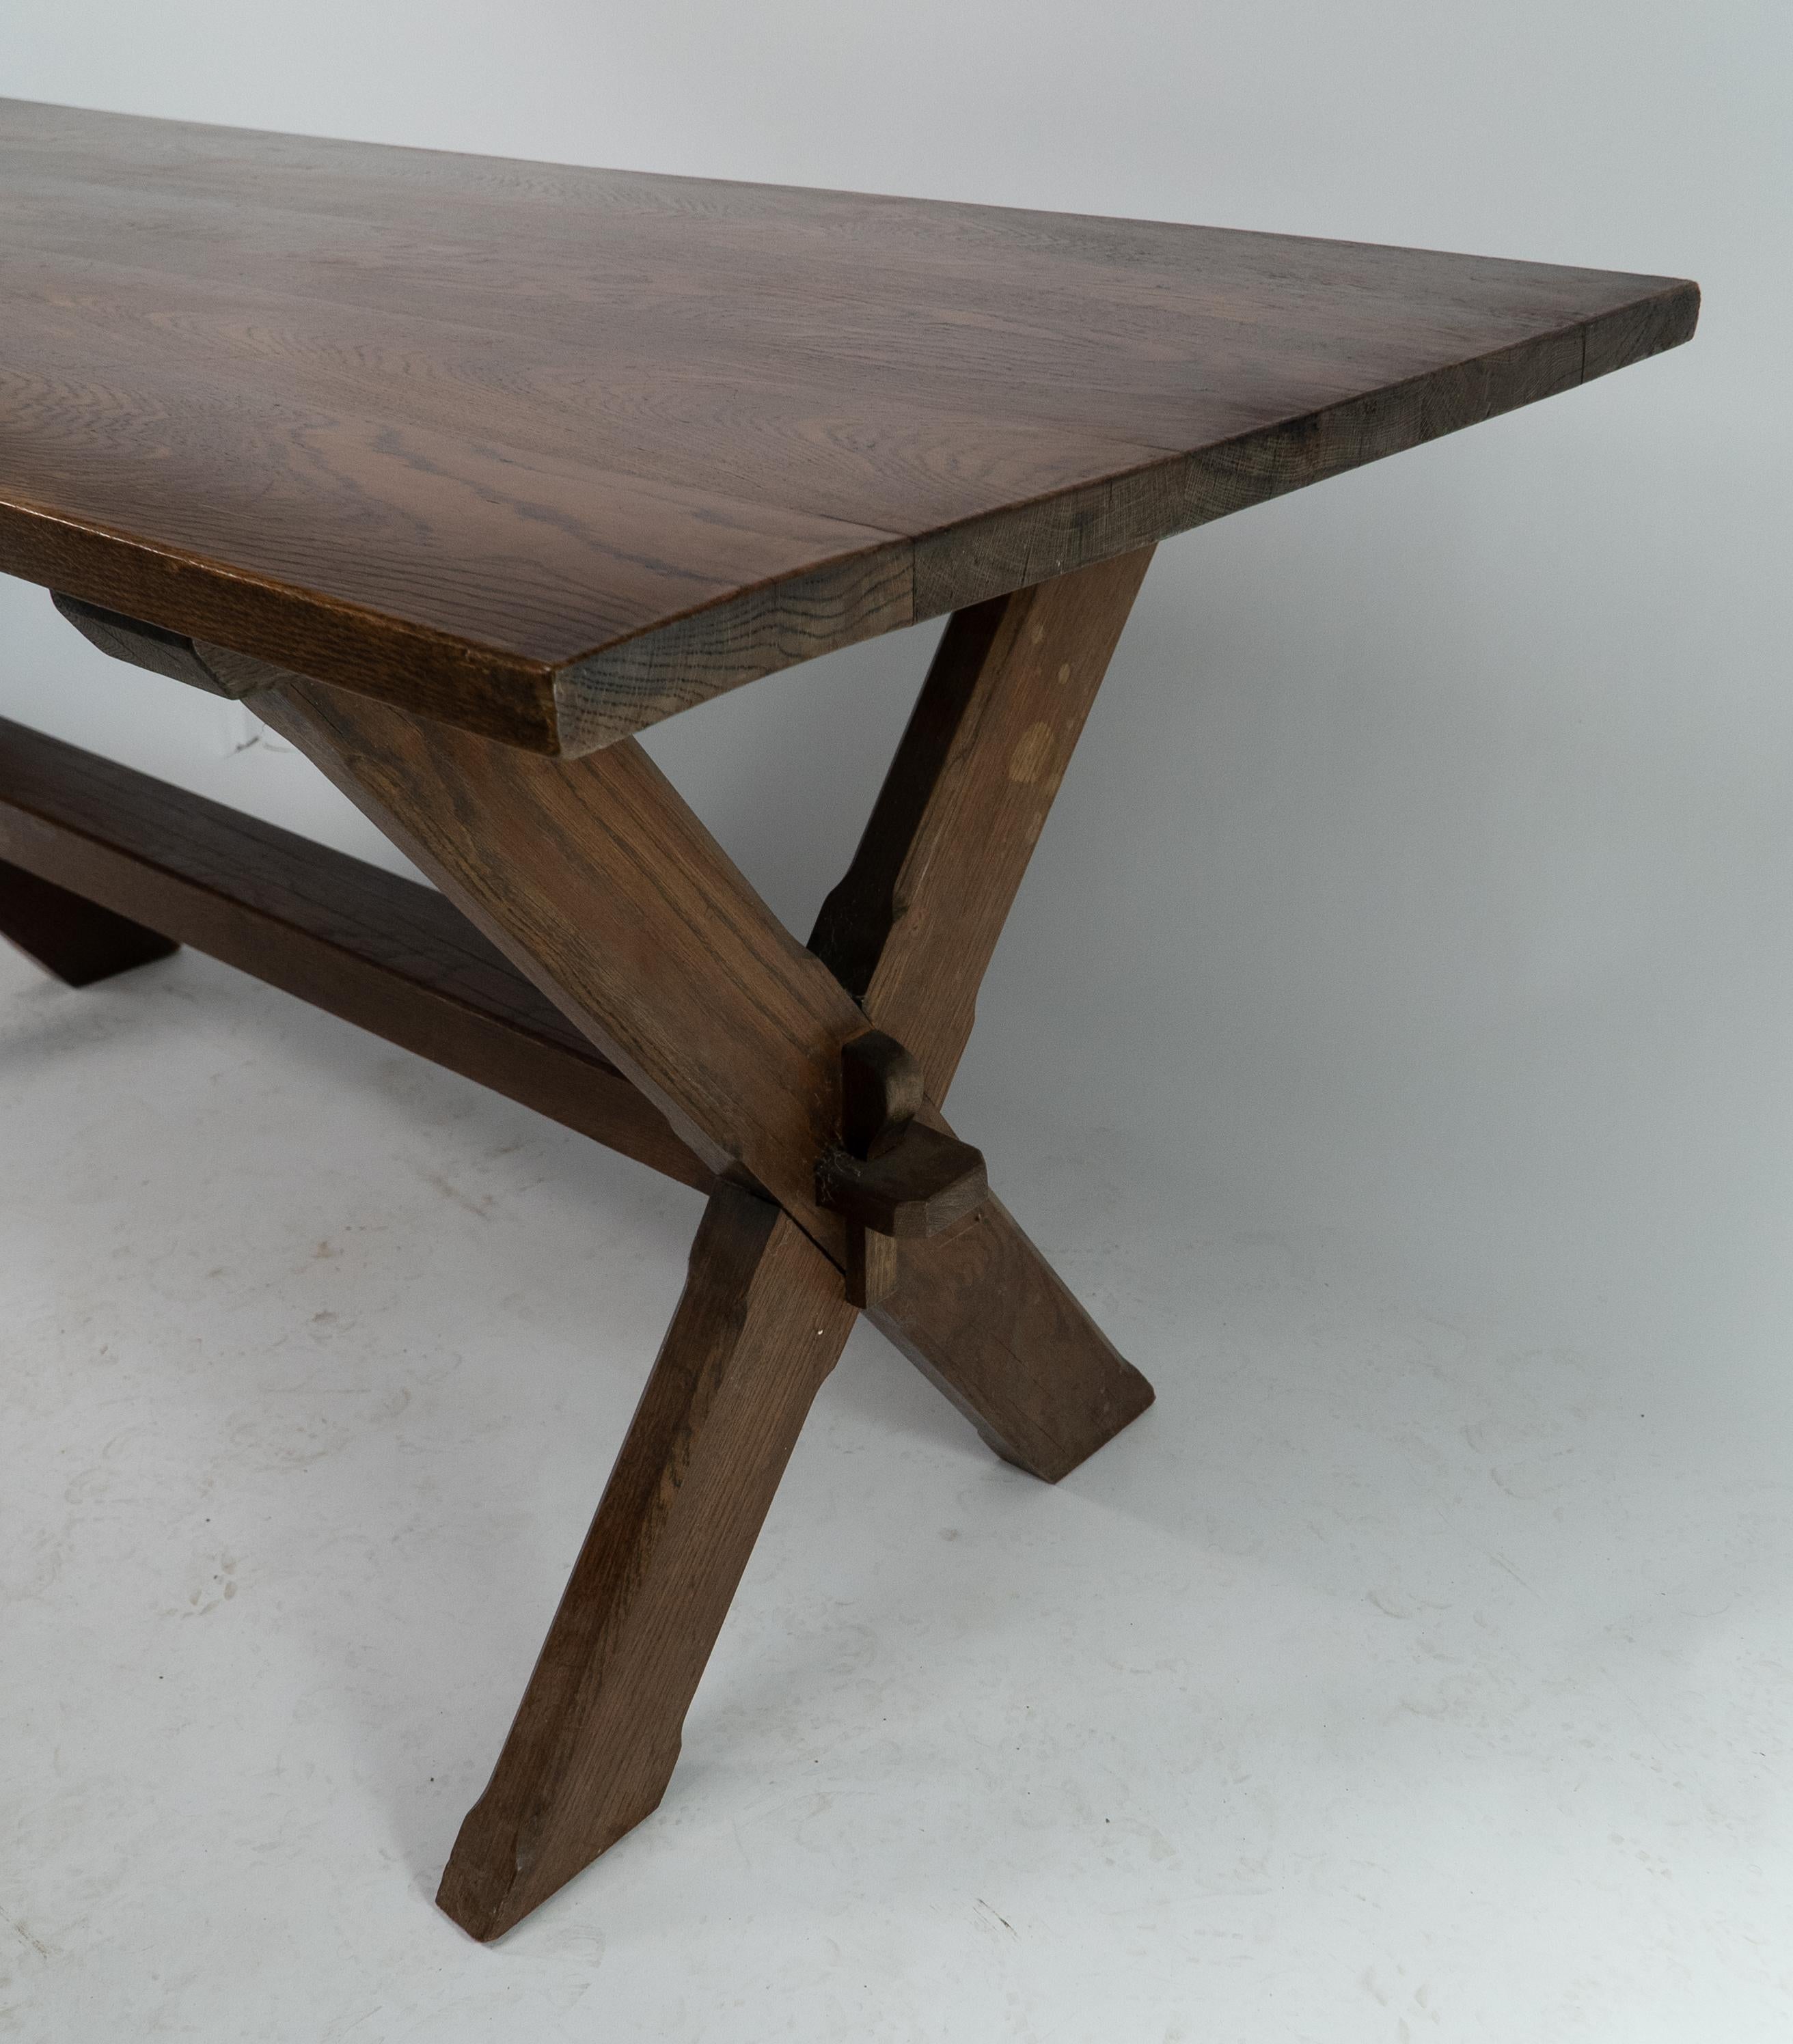 Oak E W Godwin for Northampton town hall. A Gothic Revival oak refectory table For Sale